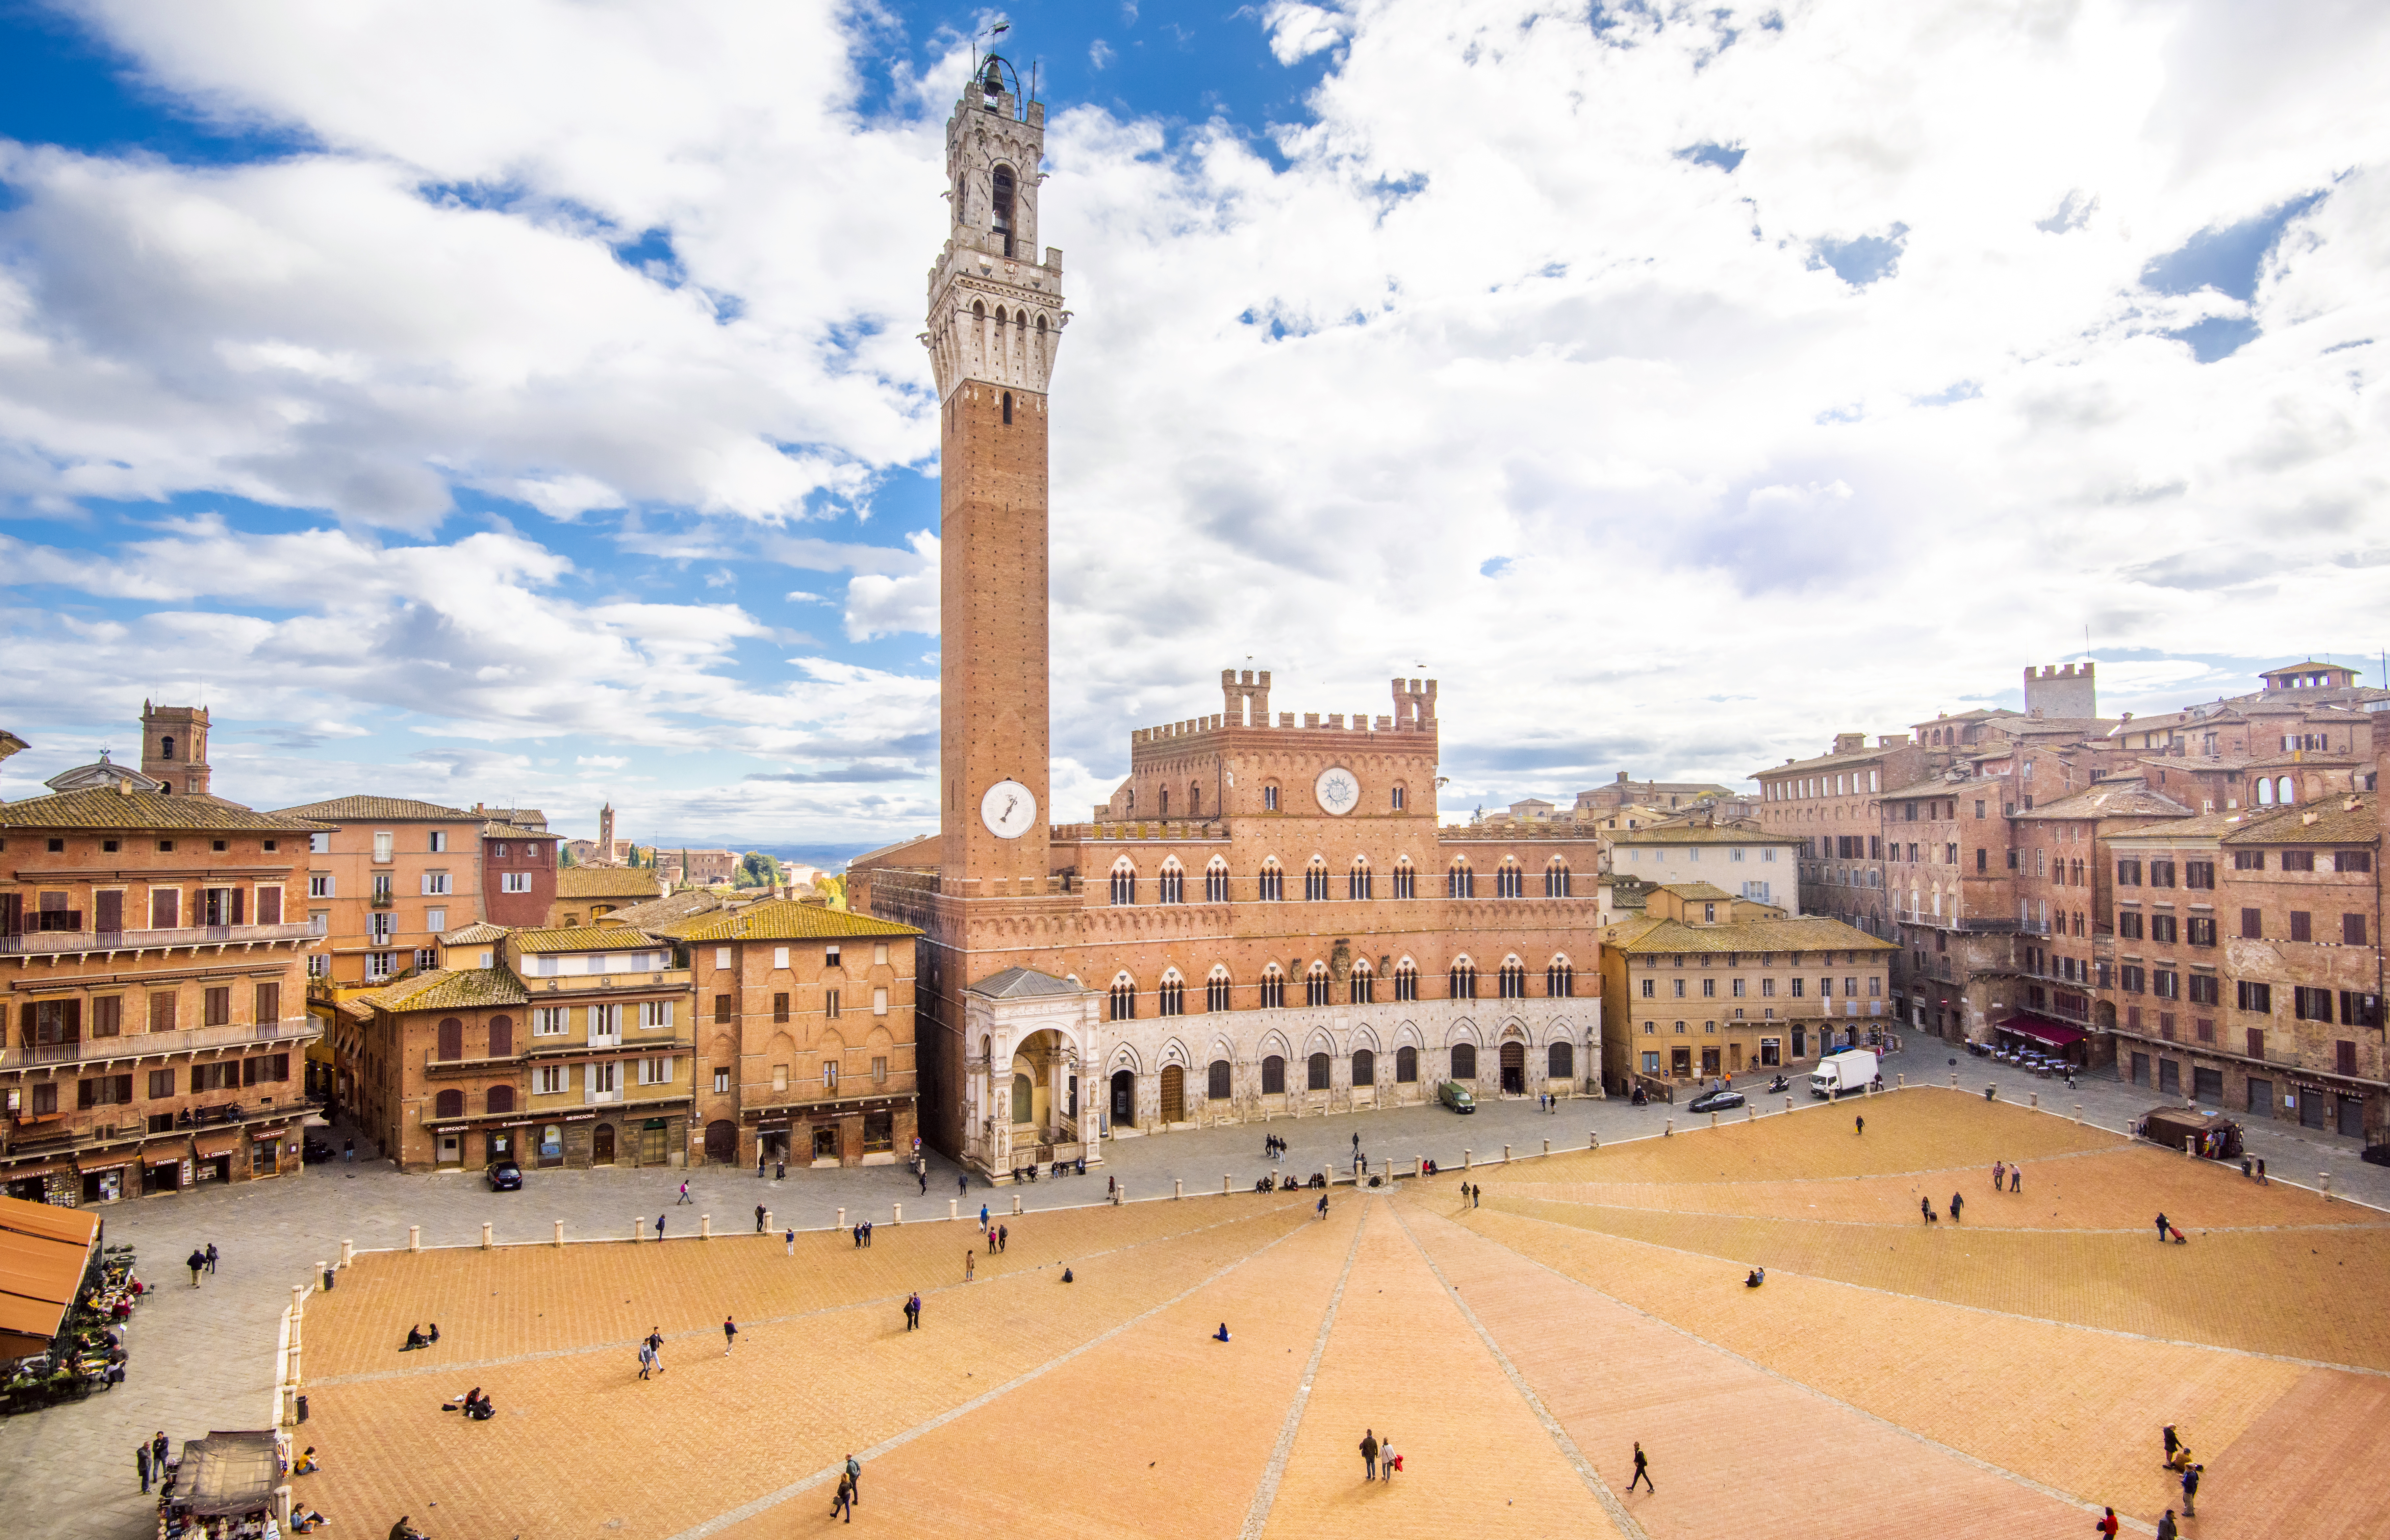 What to see in Siena in 2 days